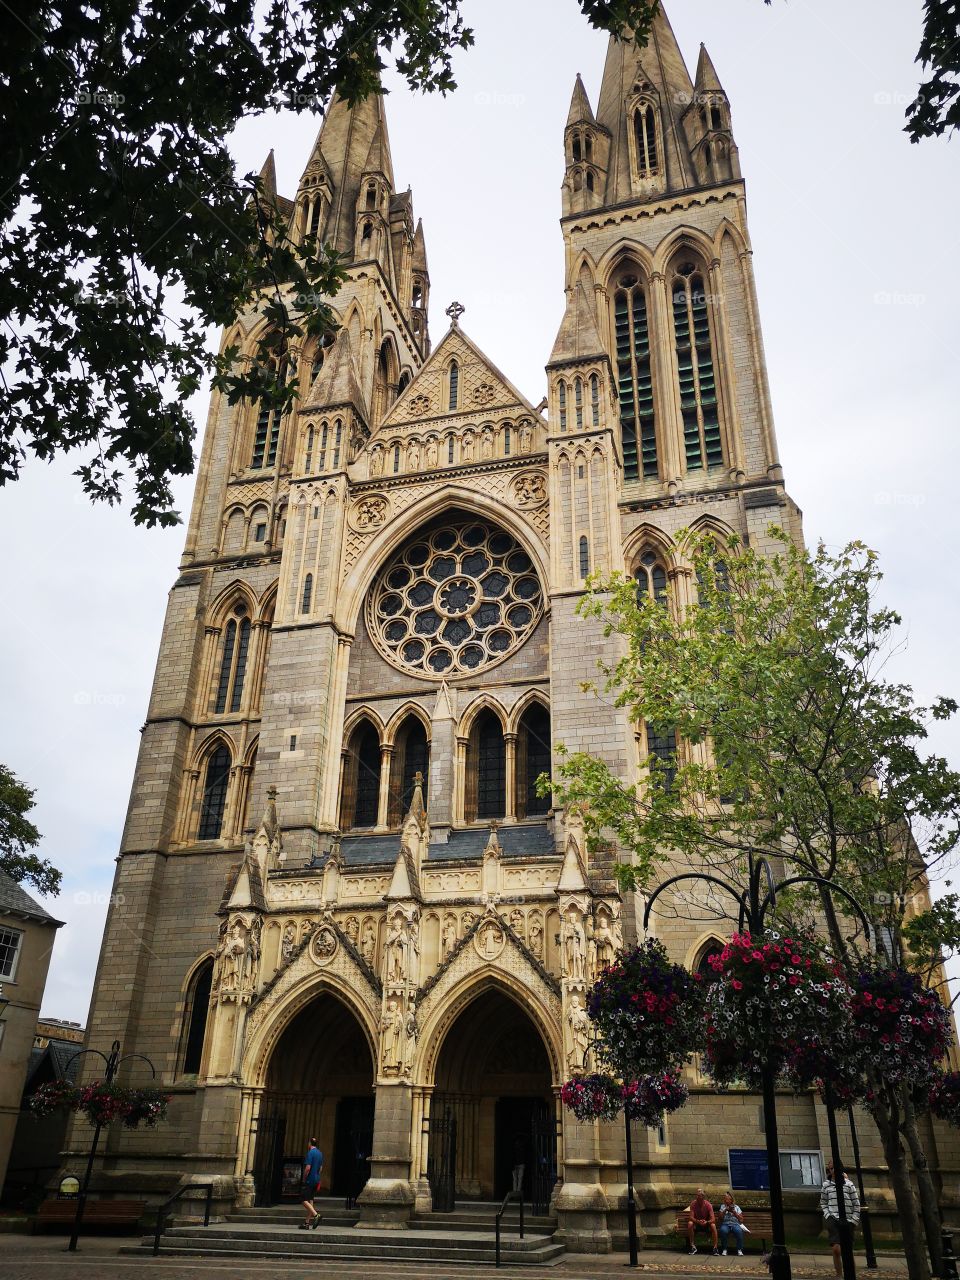 my trip to Truro cathedral